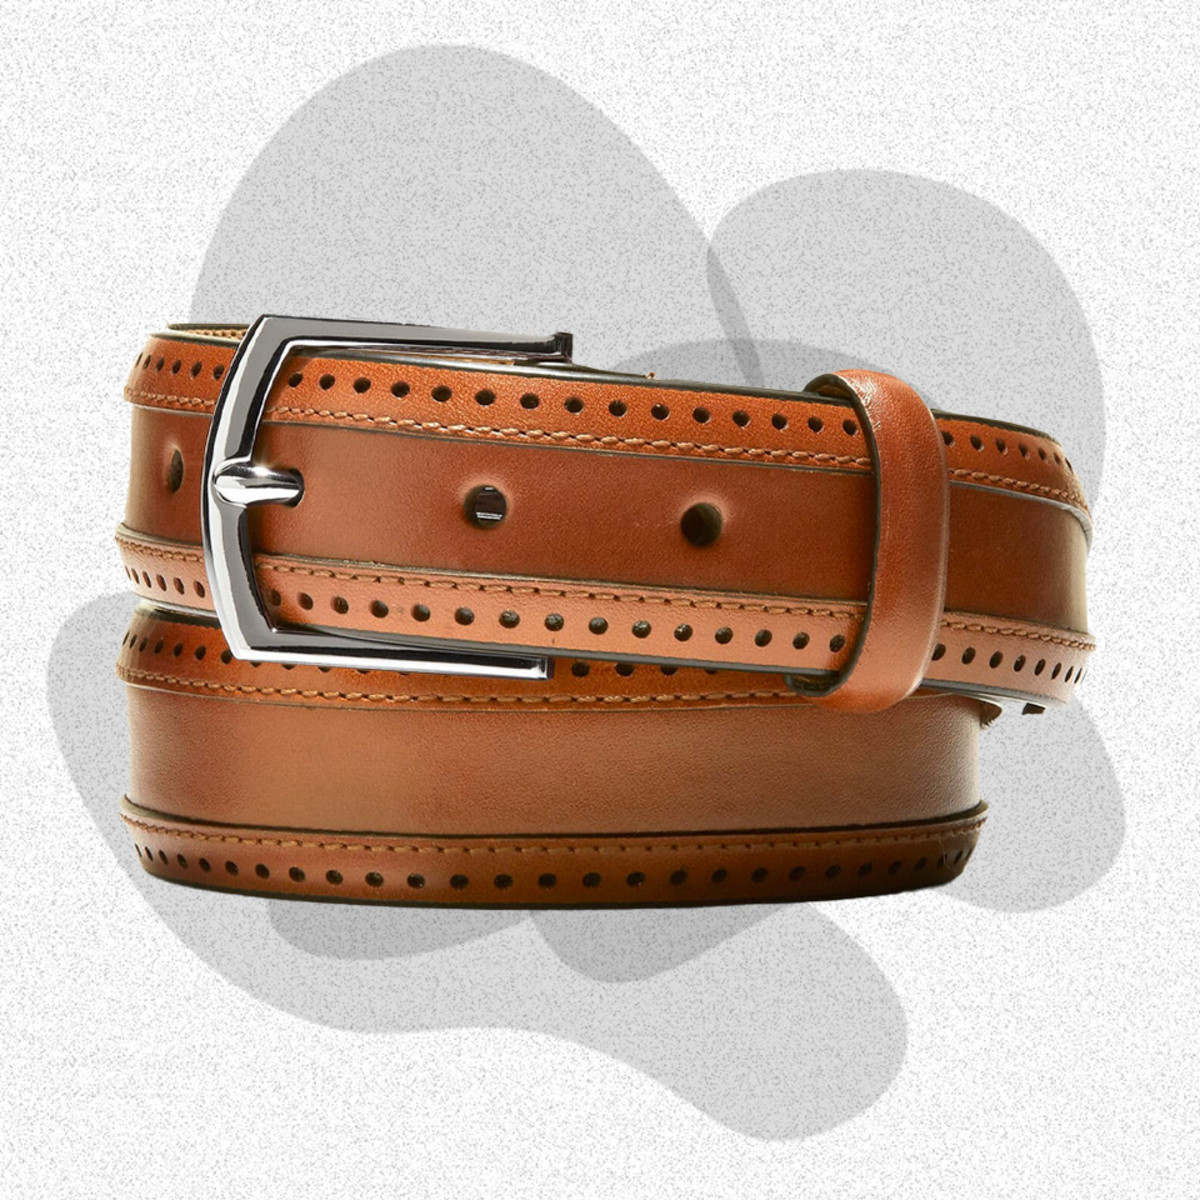 14 Best Belts for Men from Casual to Dressy